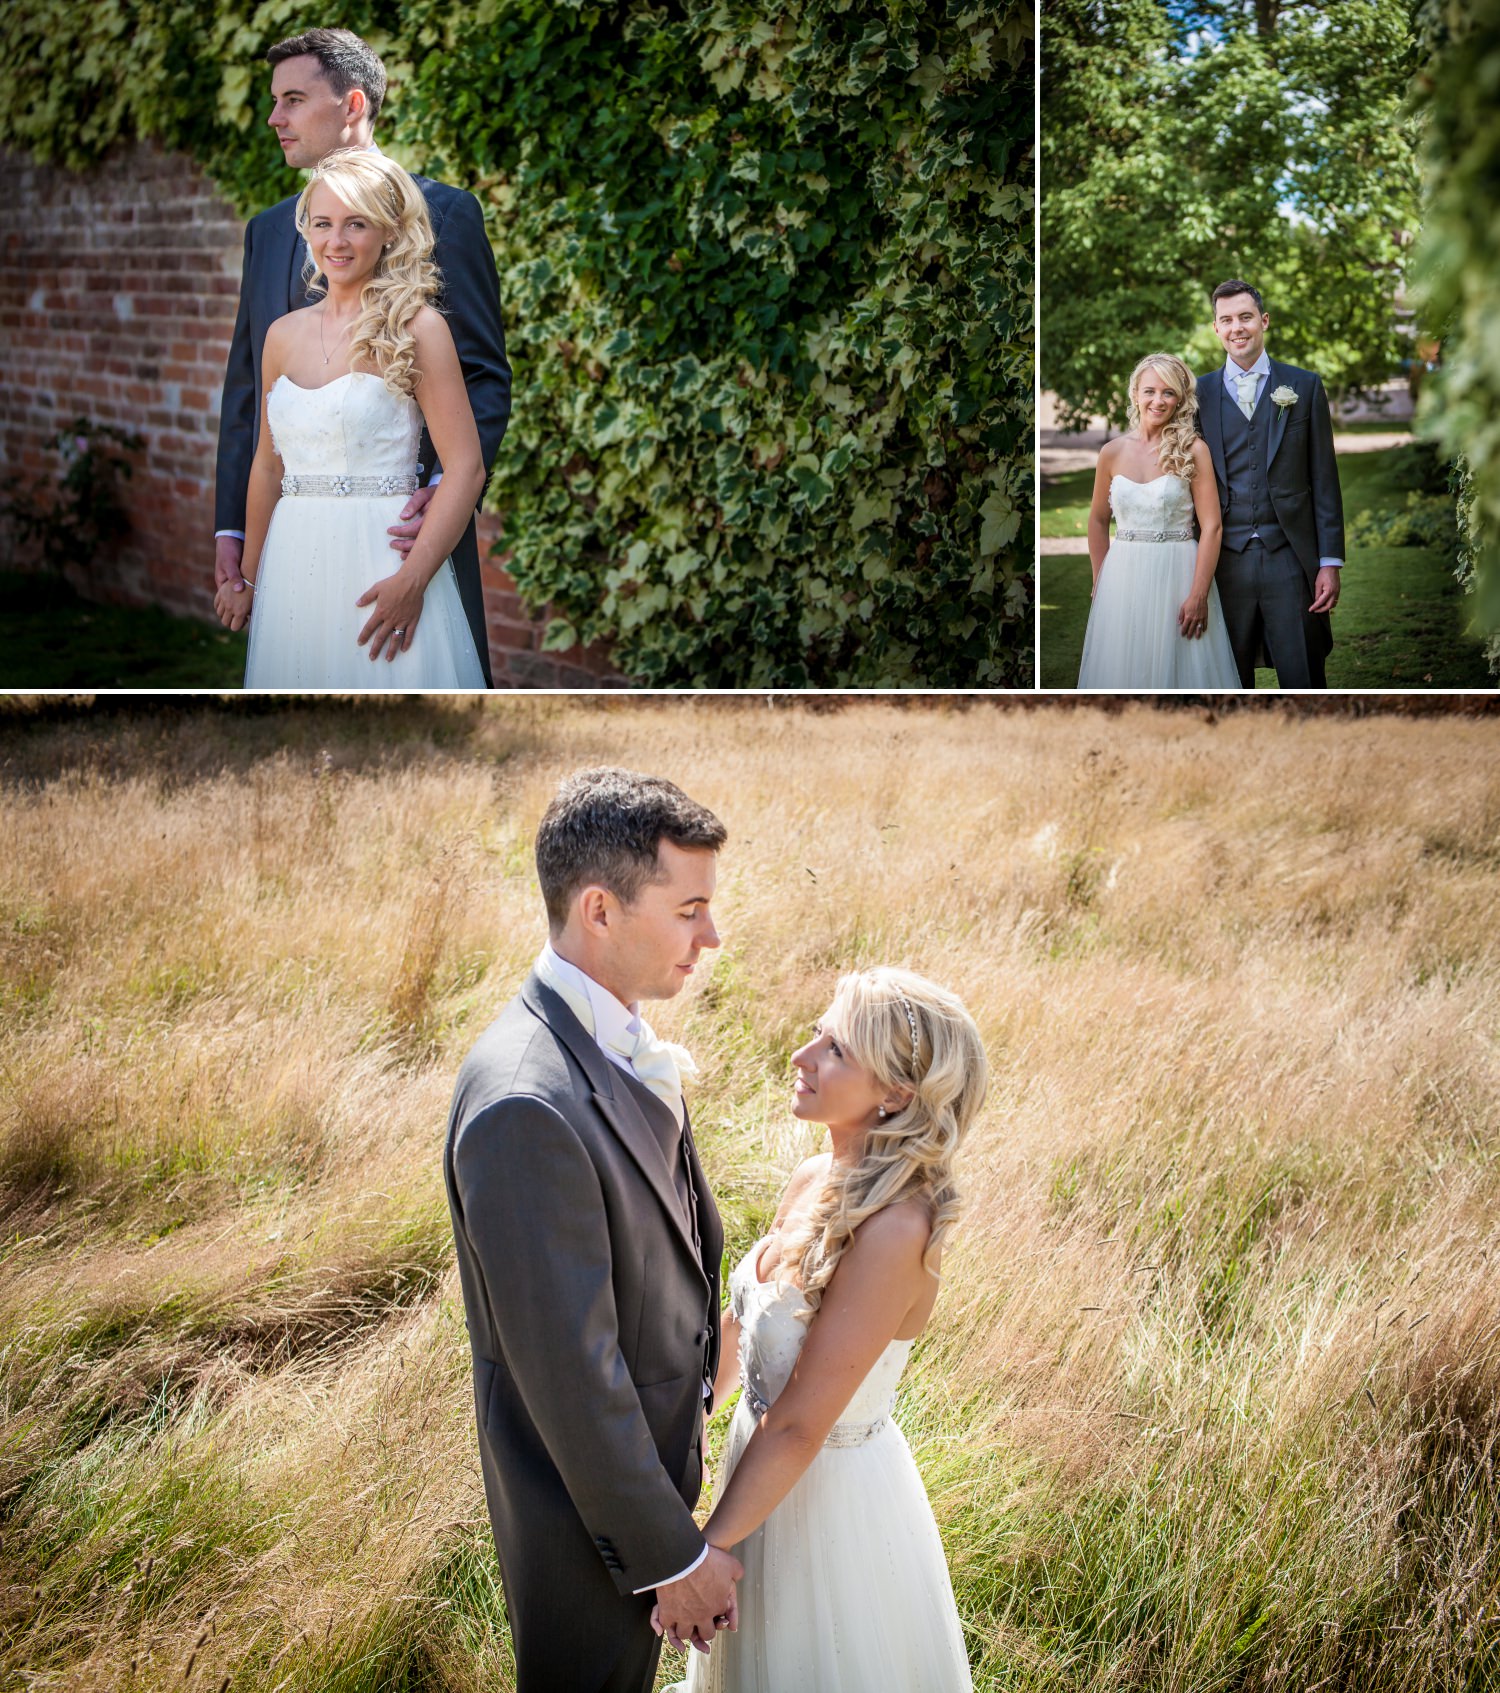 Wedding Photography portraits in the gardens of Iscoyd Park